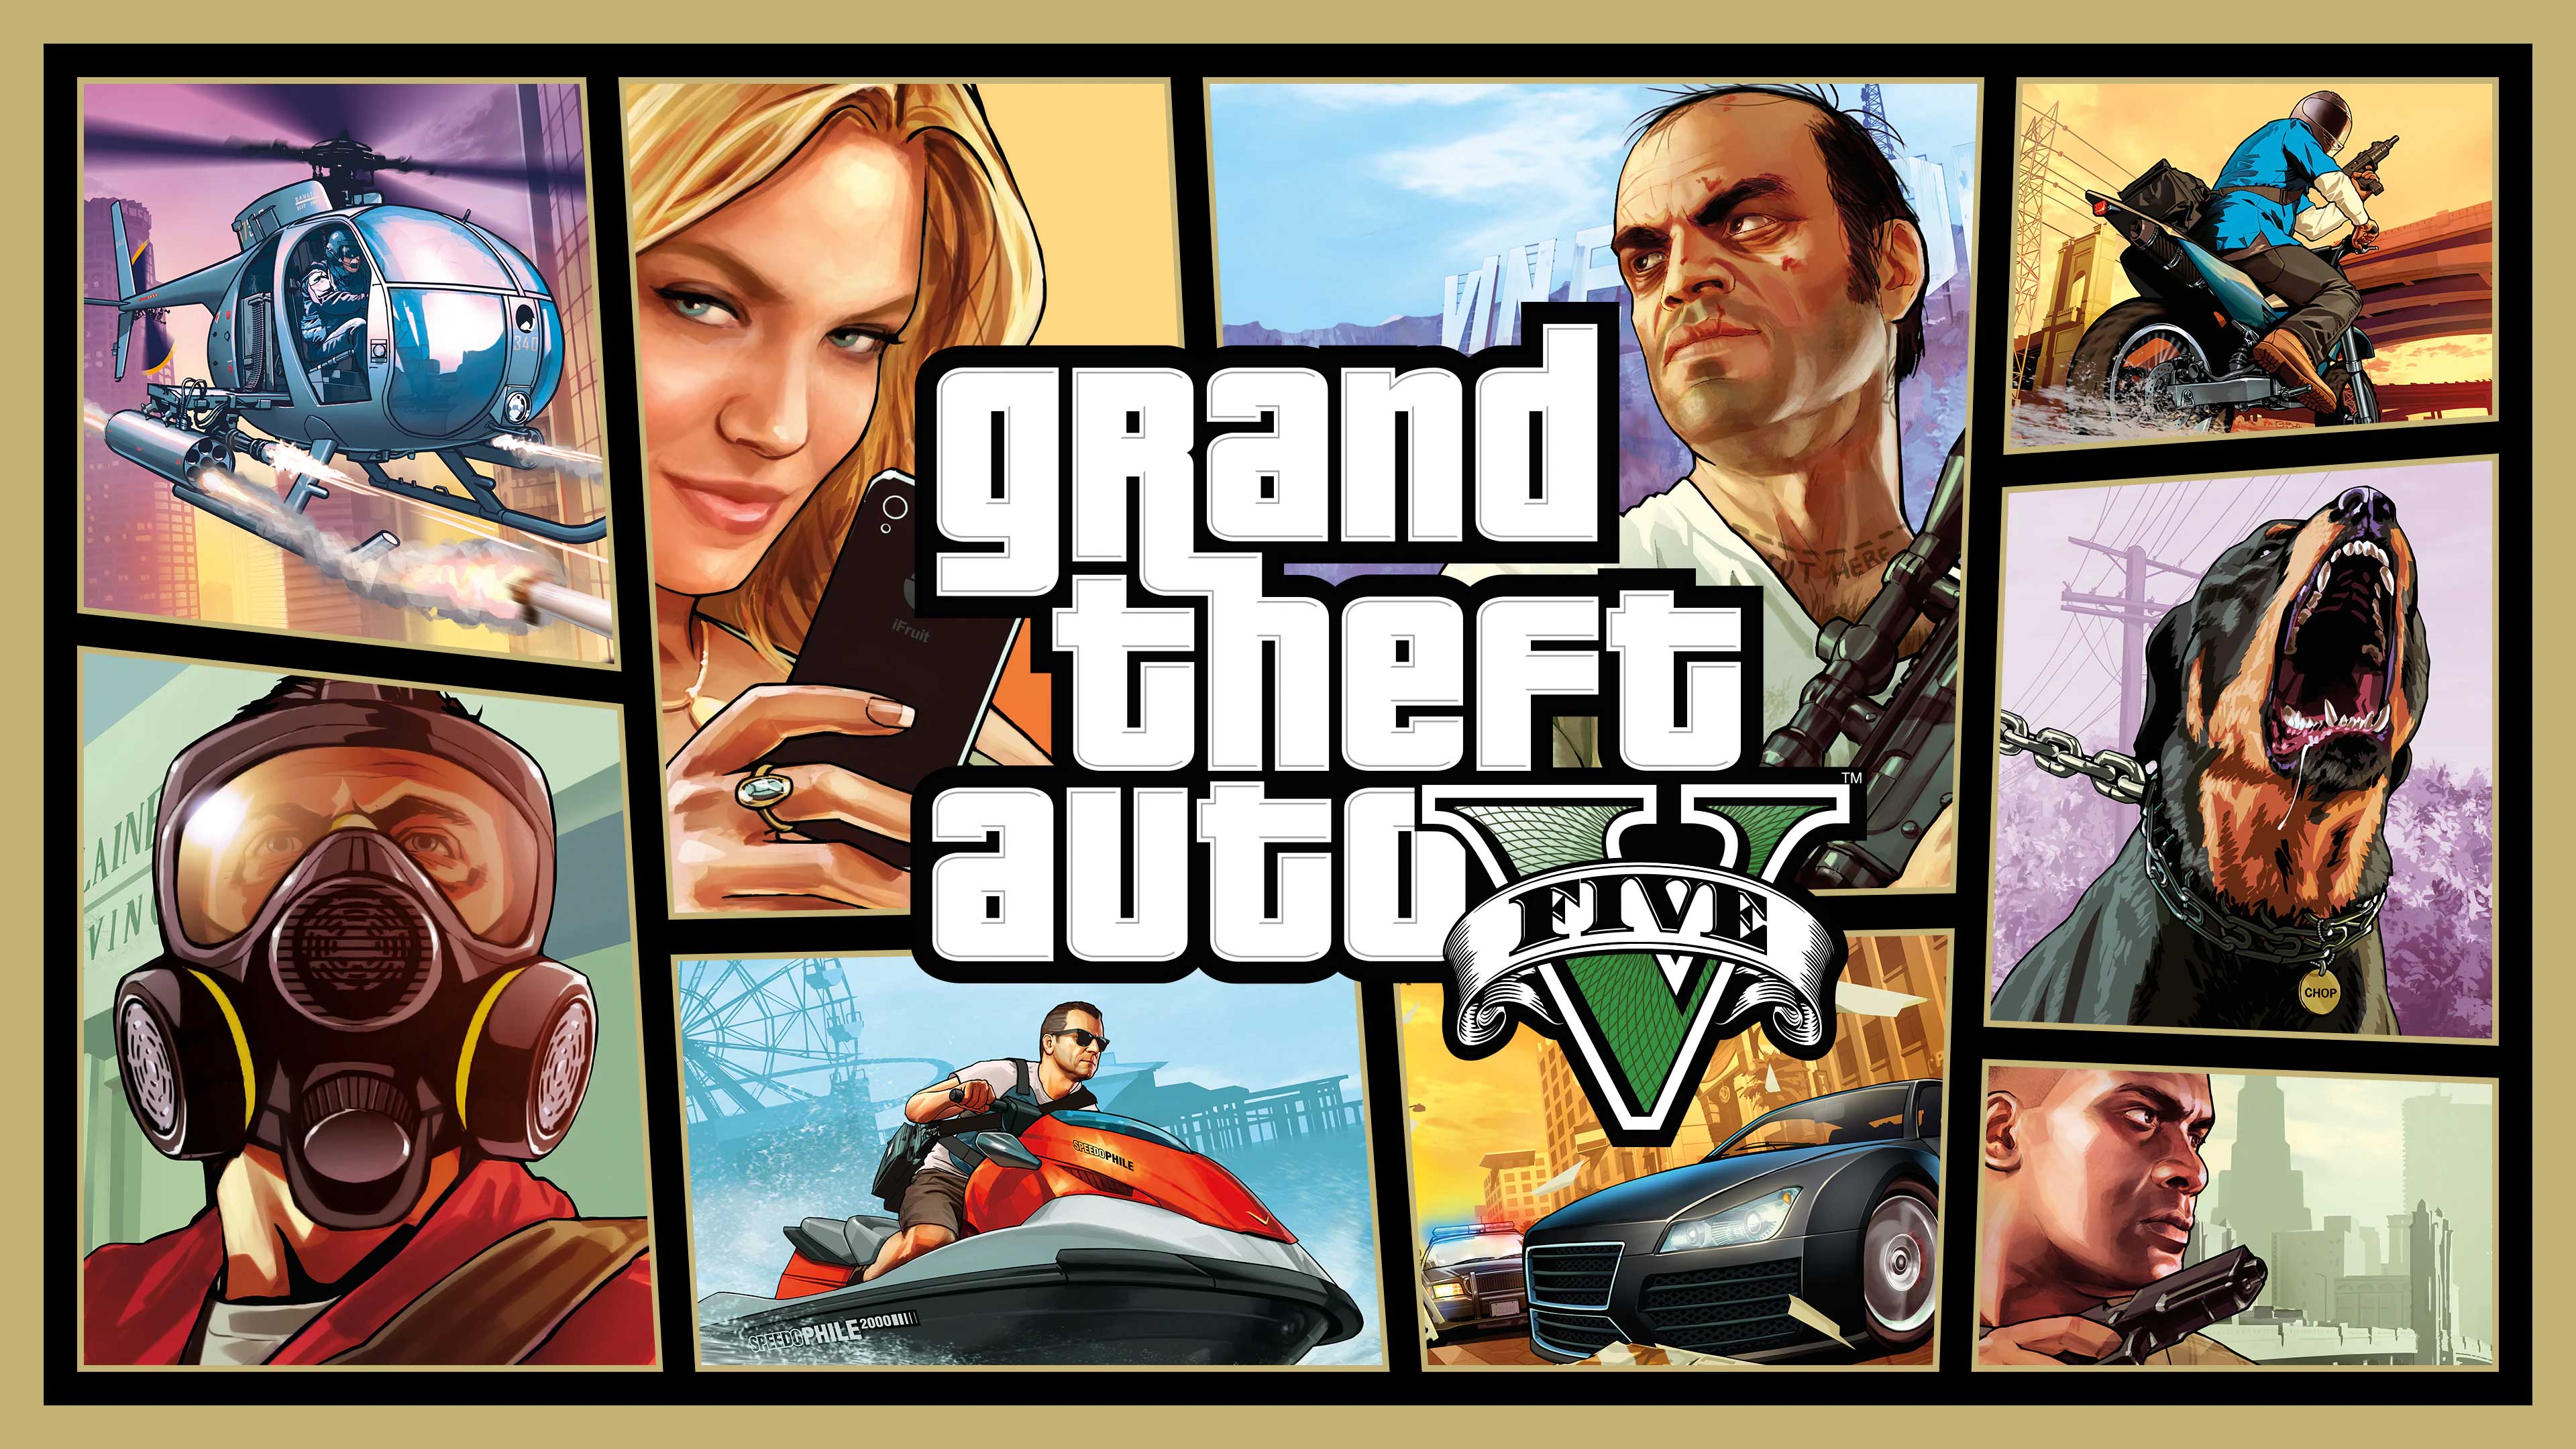 Grand Theft Auto V, The Infamous Gamer, theinfamousgamer.com